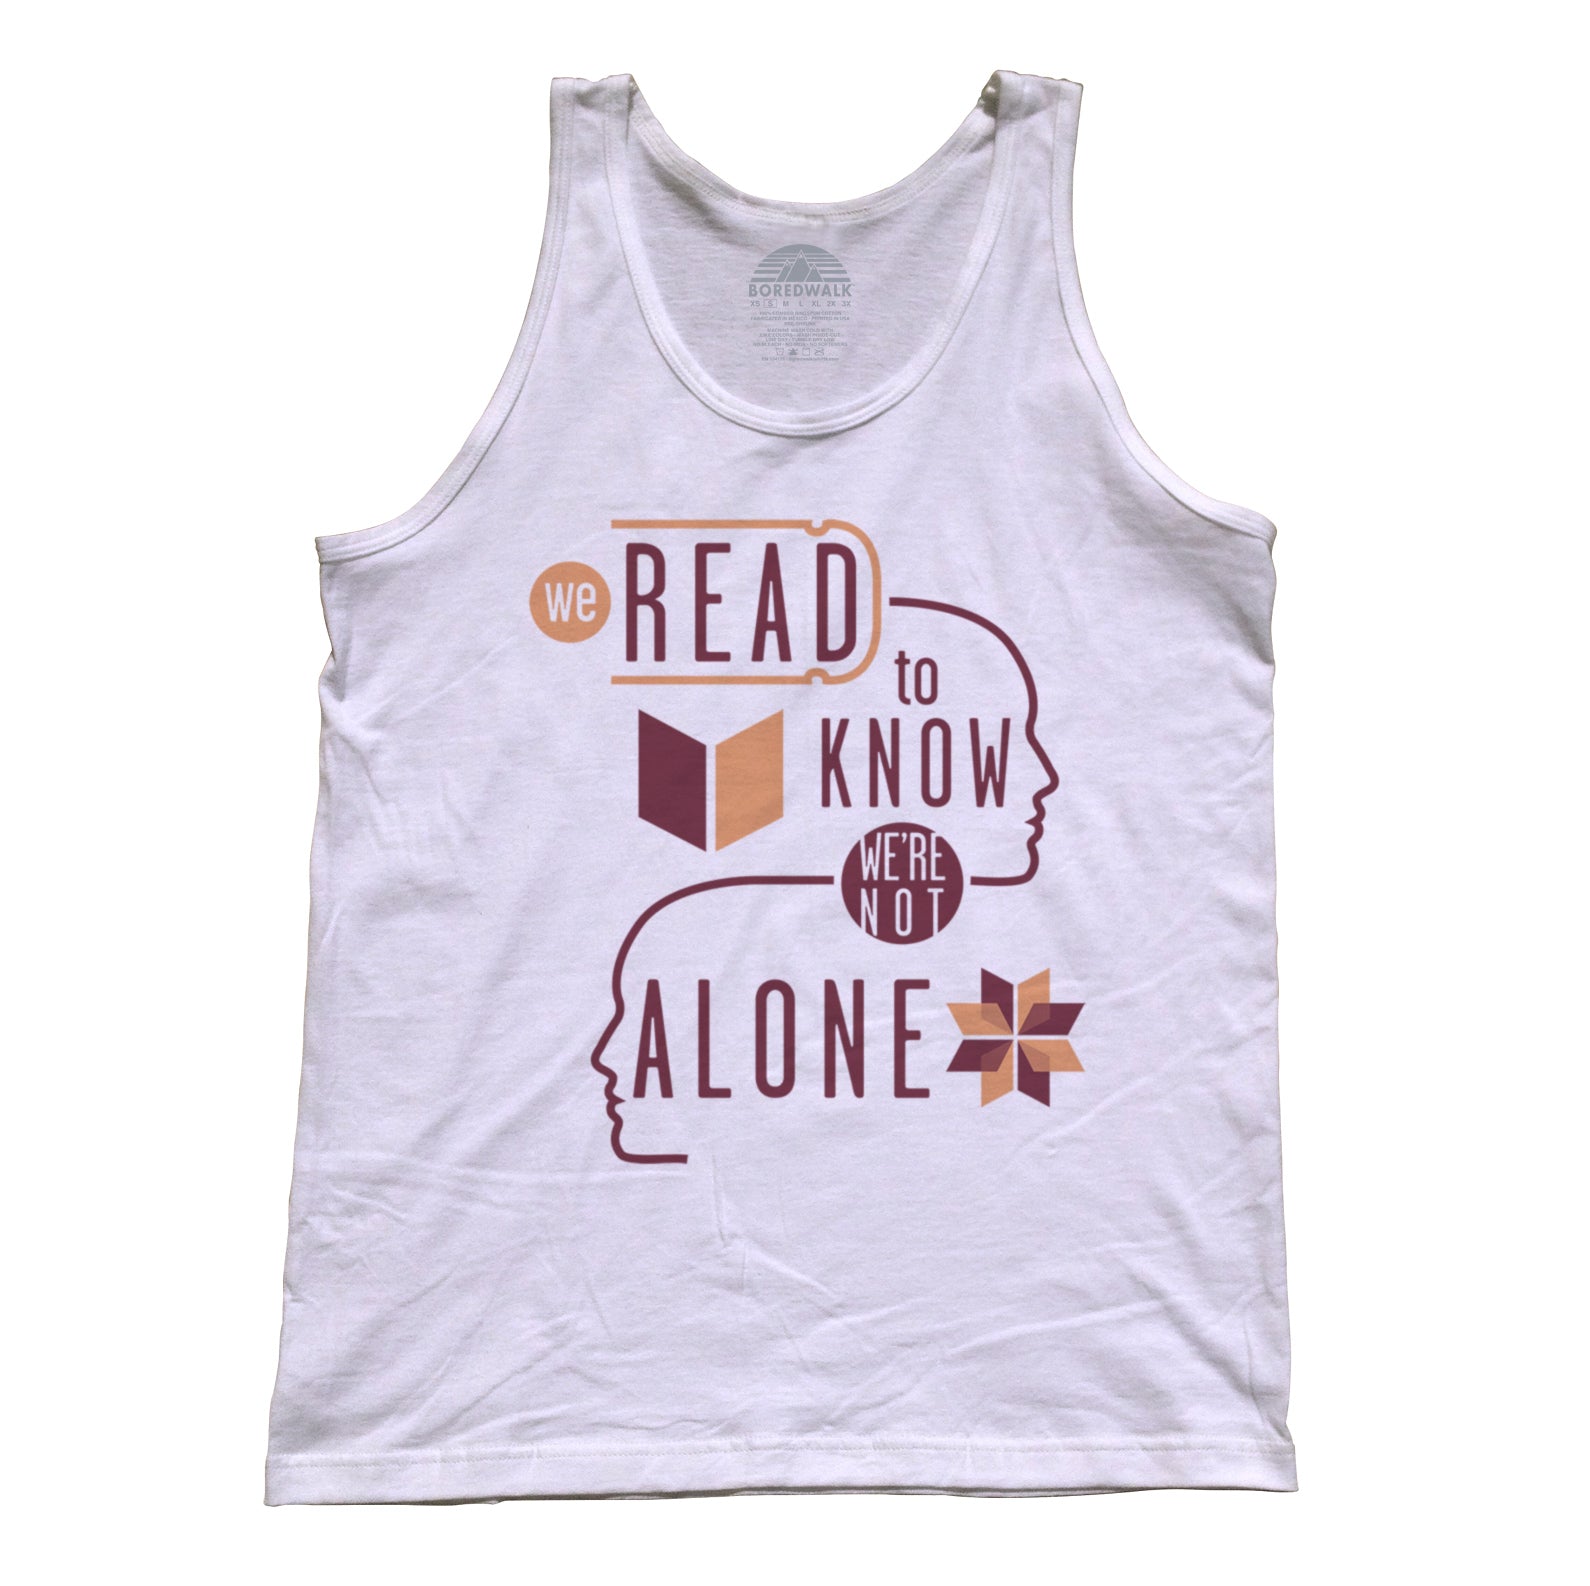 Unisex We Read to Know We are Not Alone Tank Top